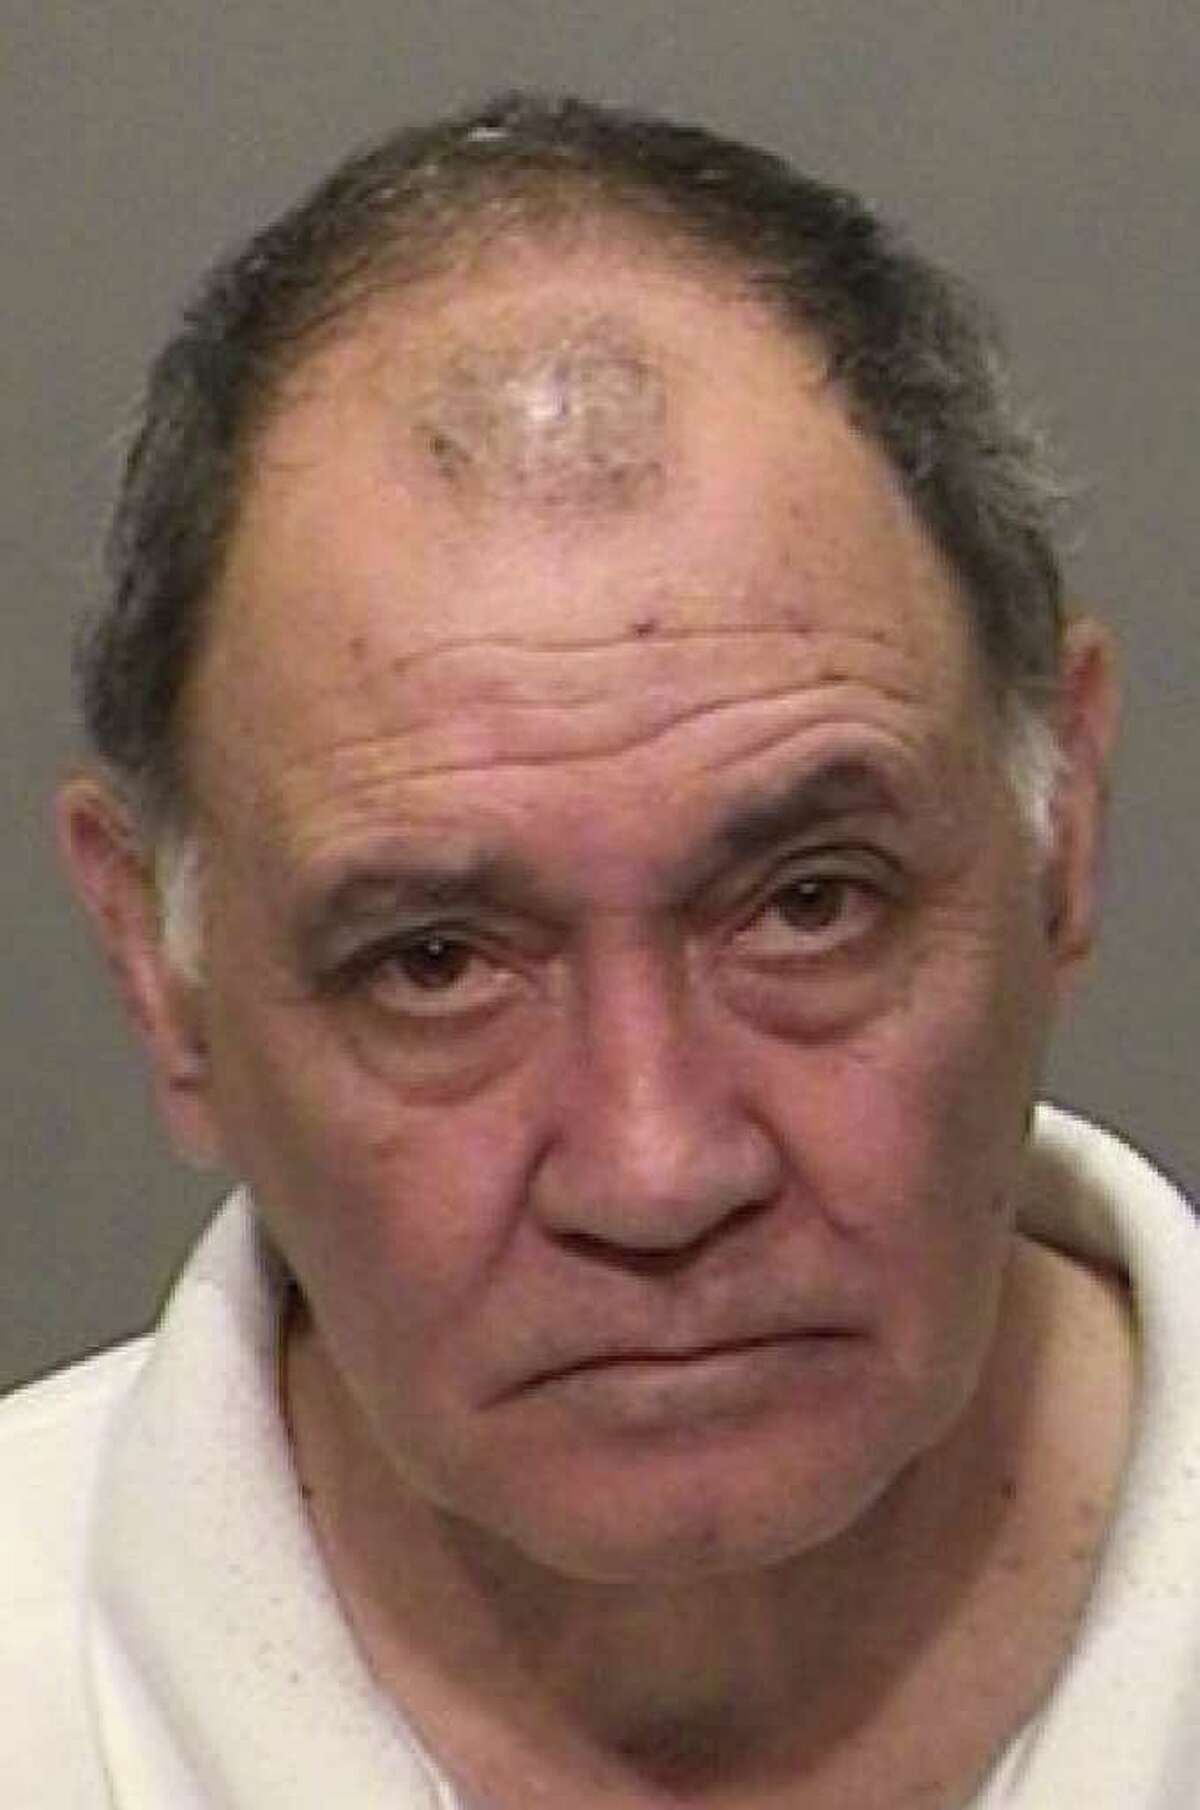 Joseph Antonelli, 64, of Stamford, has been charged by Greenwich police with three counts of disorderly conduct for allegedly making threats against President Barack Obama, who stopped in Stamford and Greenwich on Thursday. Photo provided by Greenwich police.